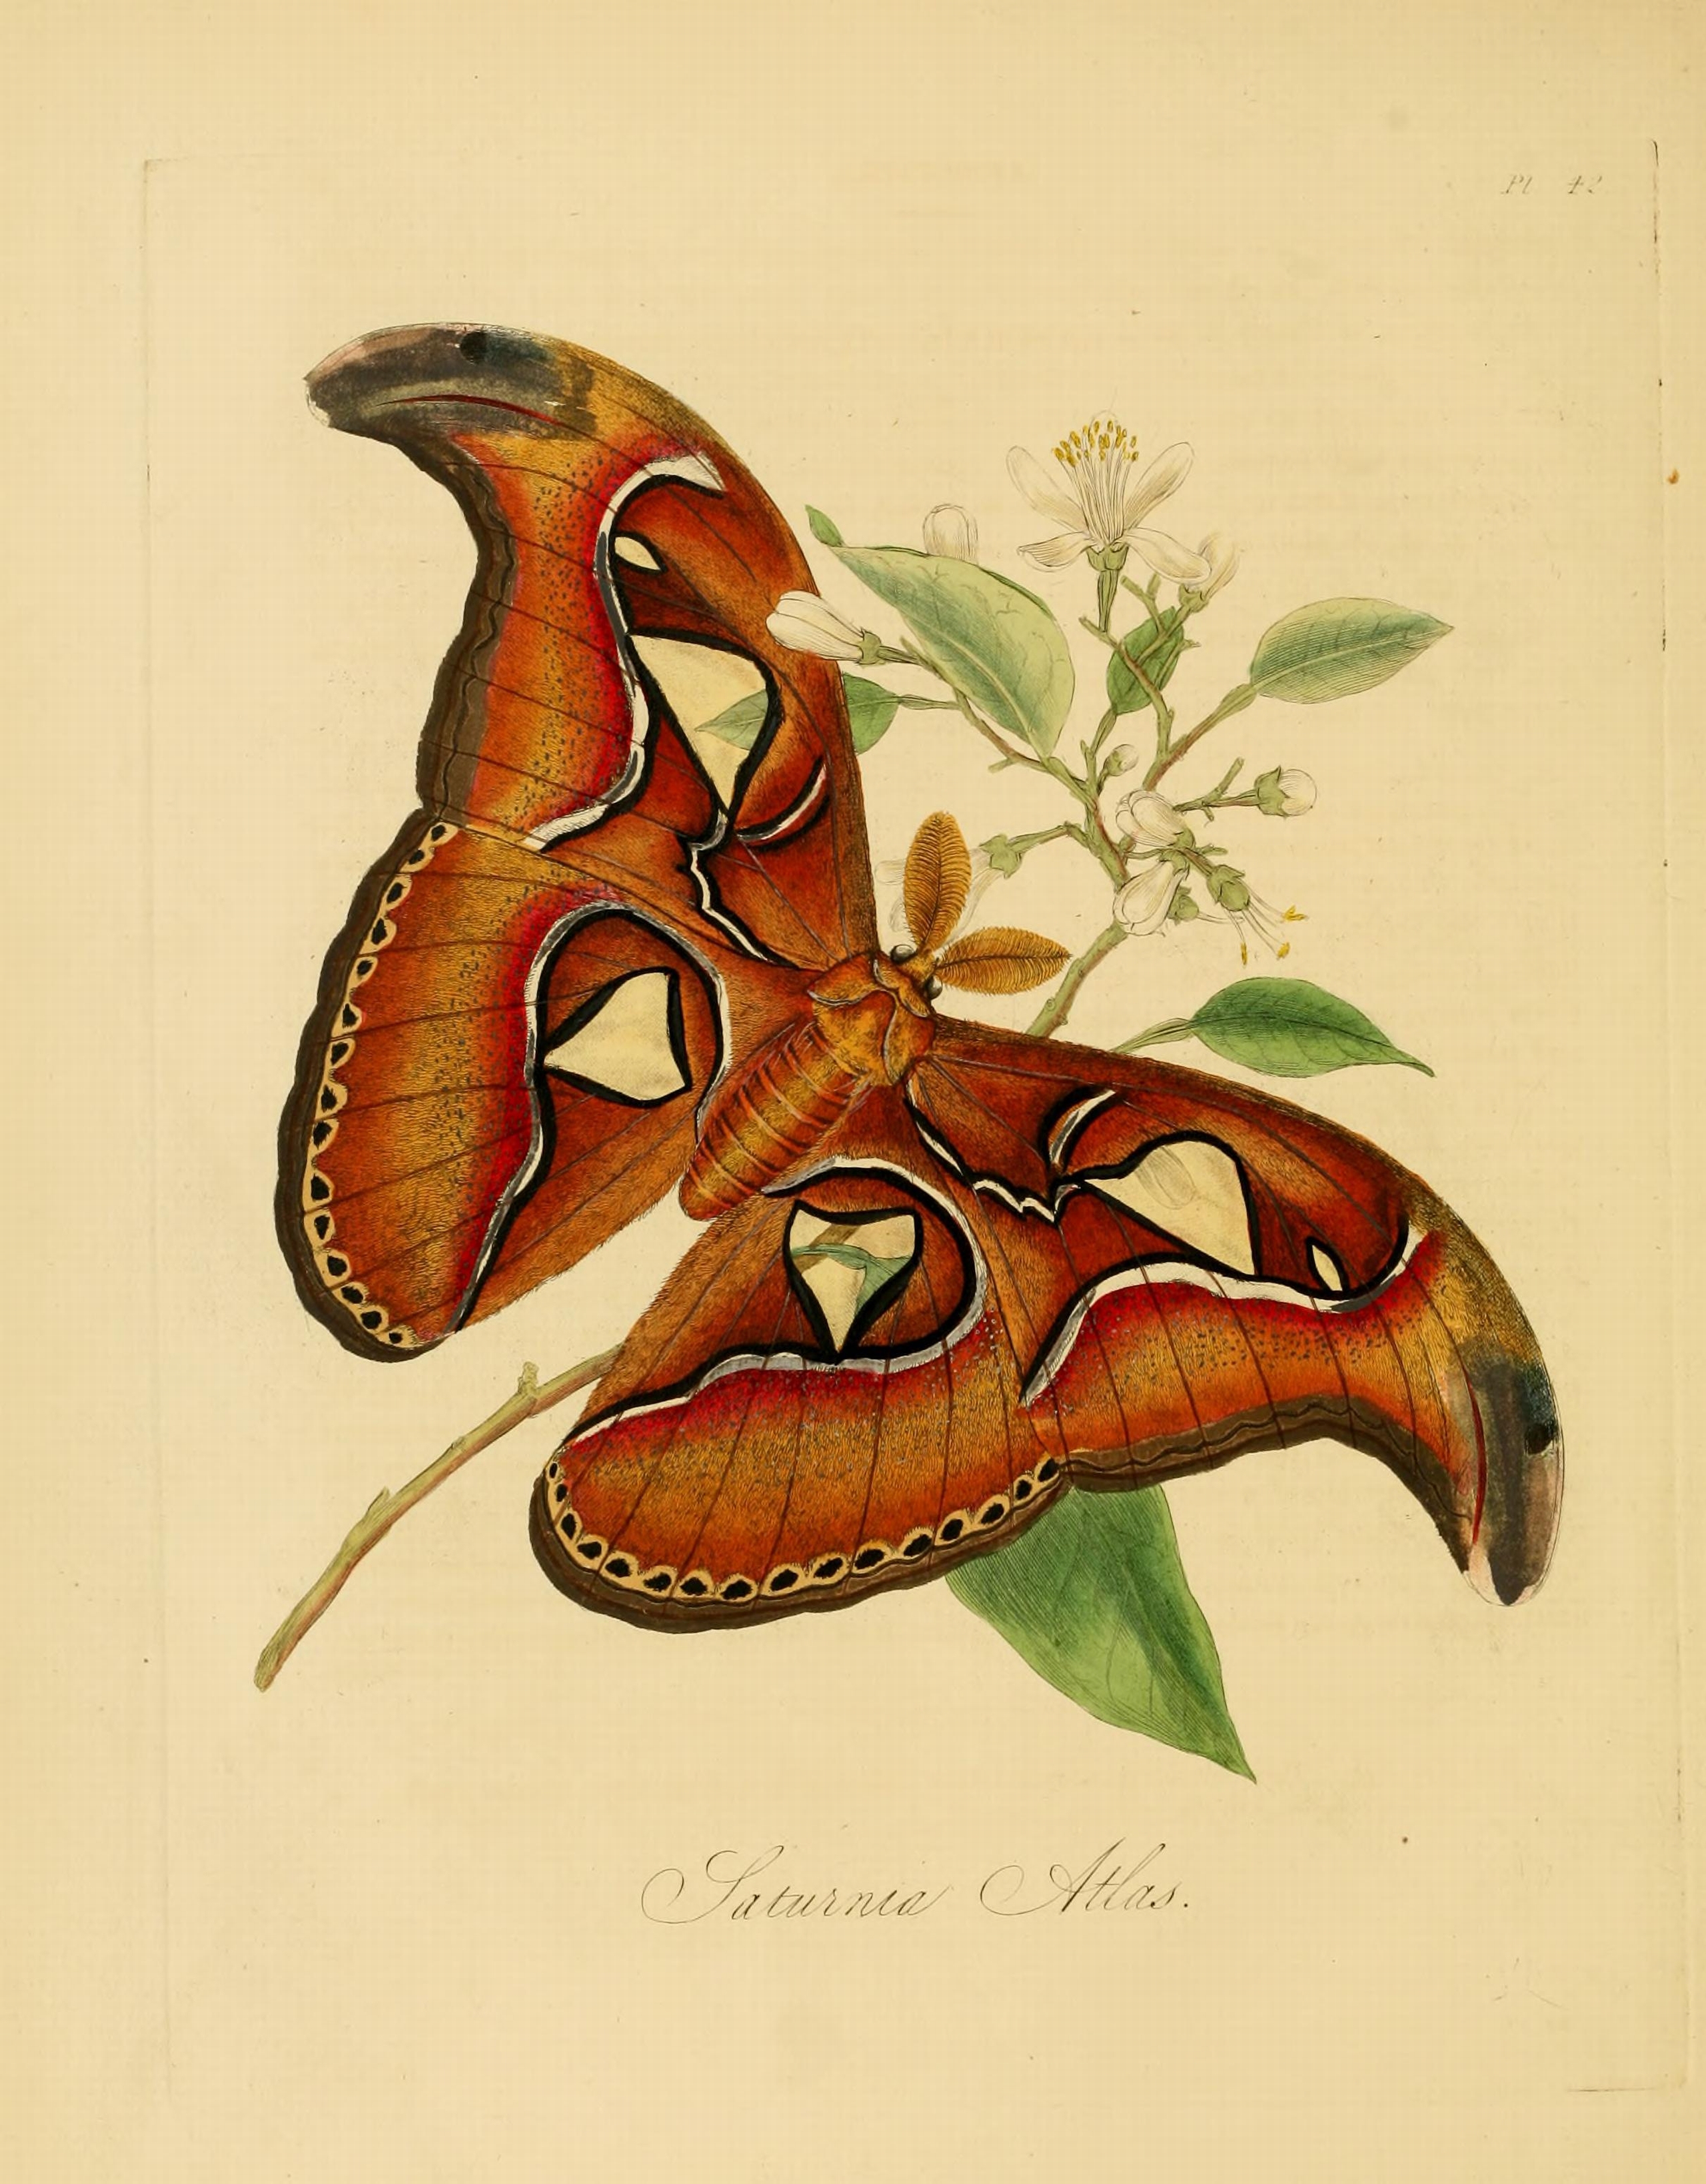 Donovan - Insects of China, 1838 - pl 42